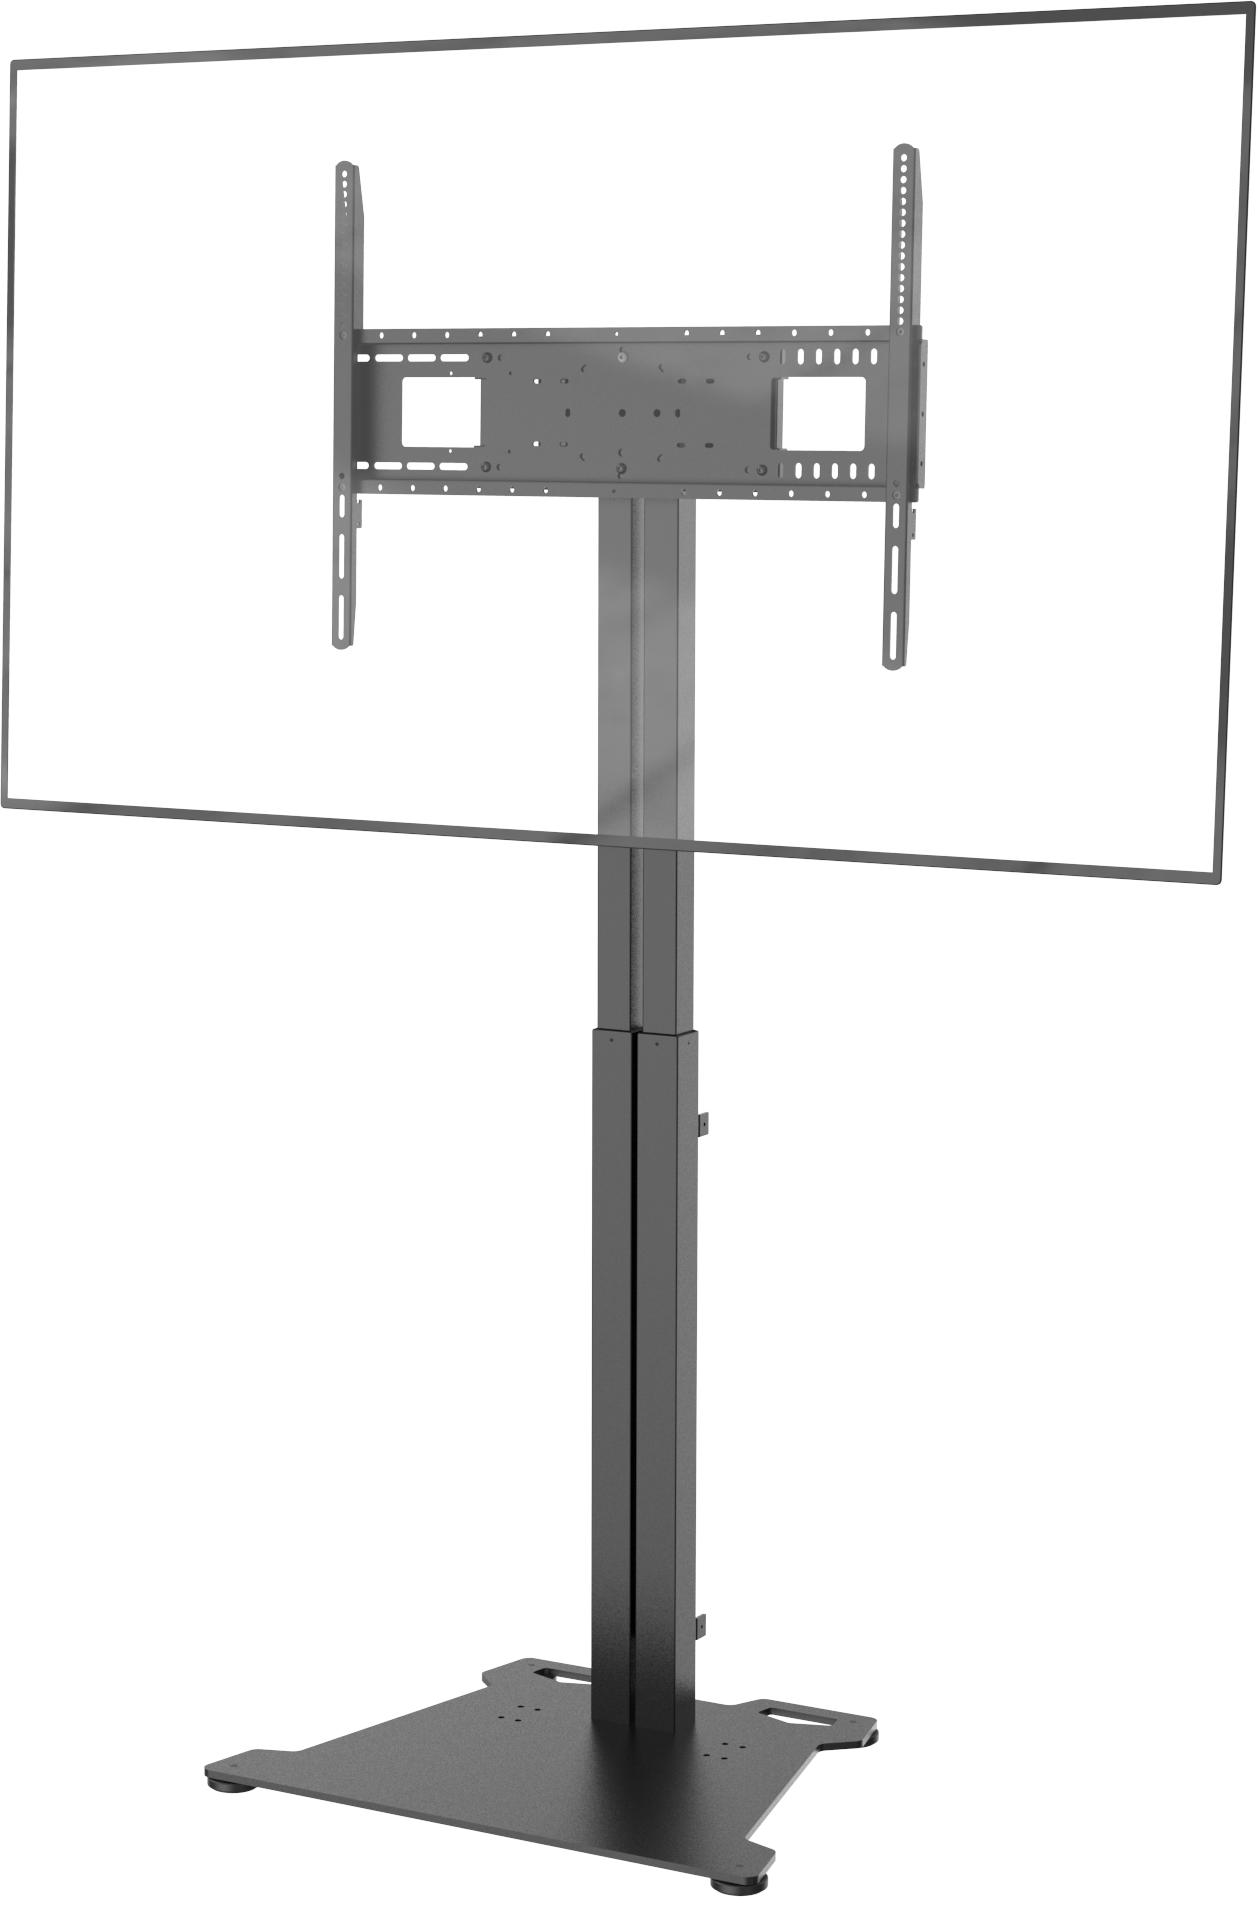 VFM-F30_FP_front_angle_right-1.png